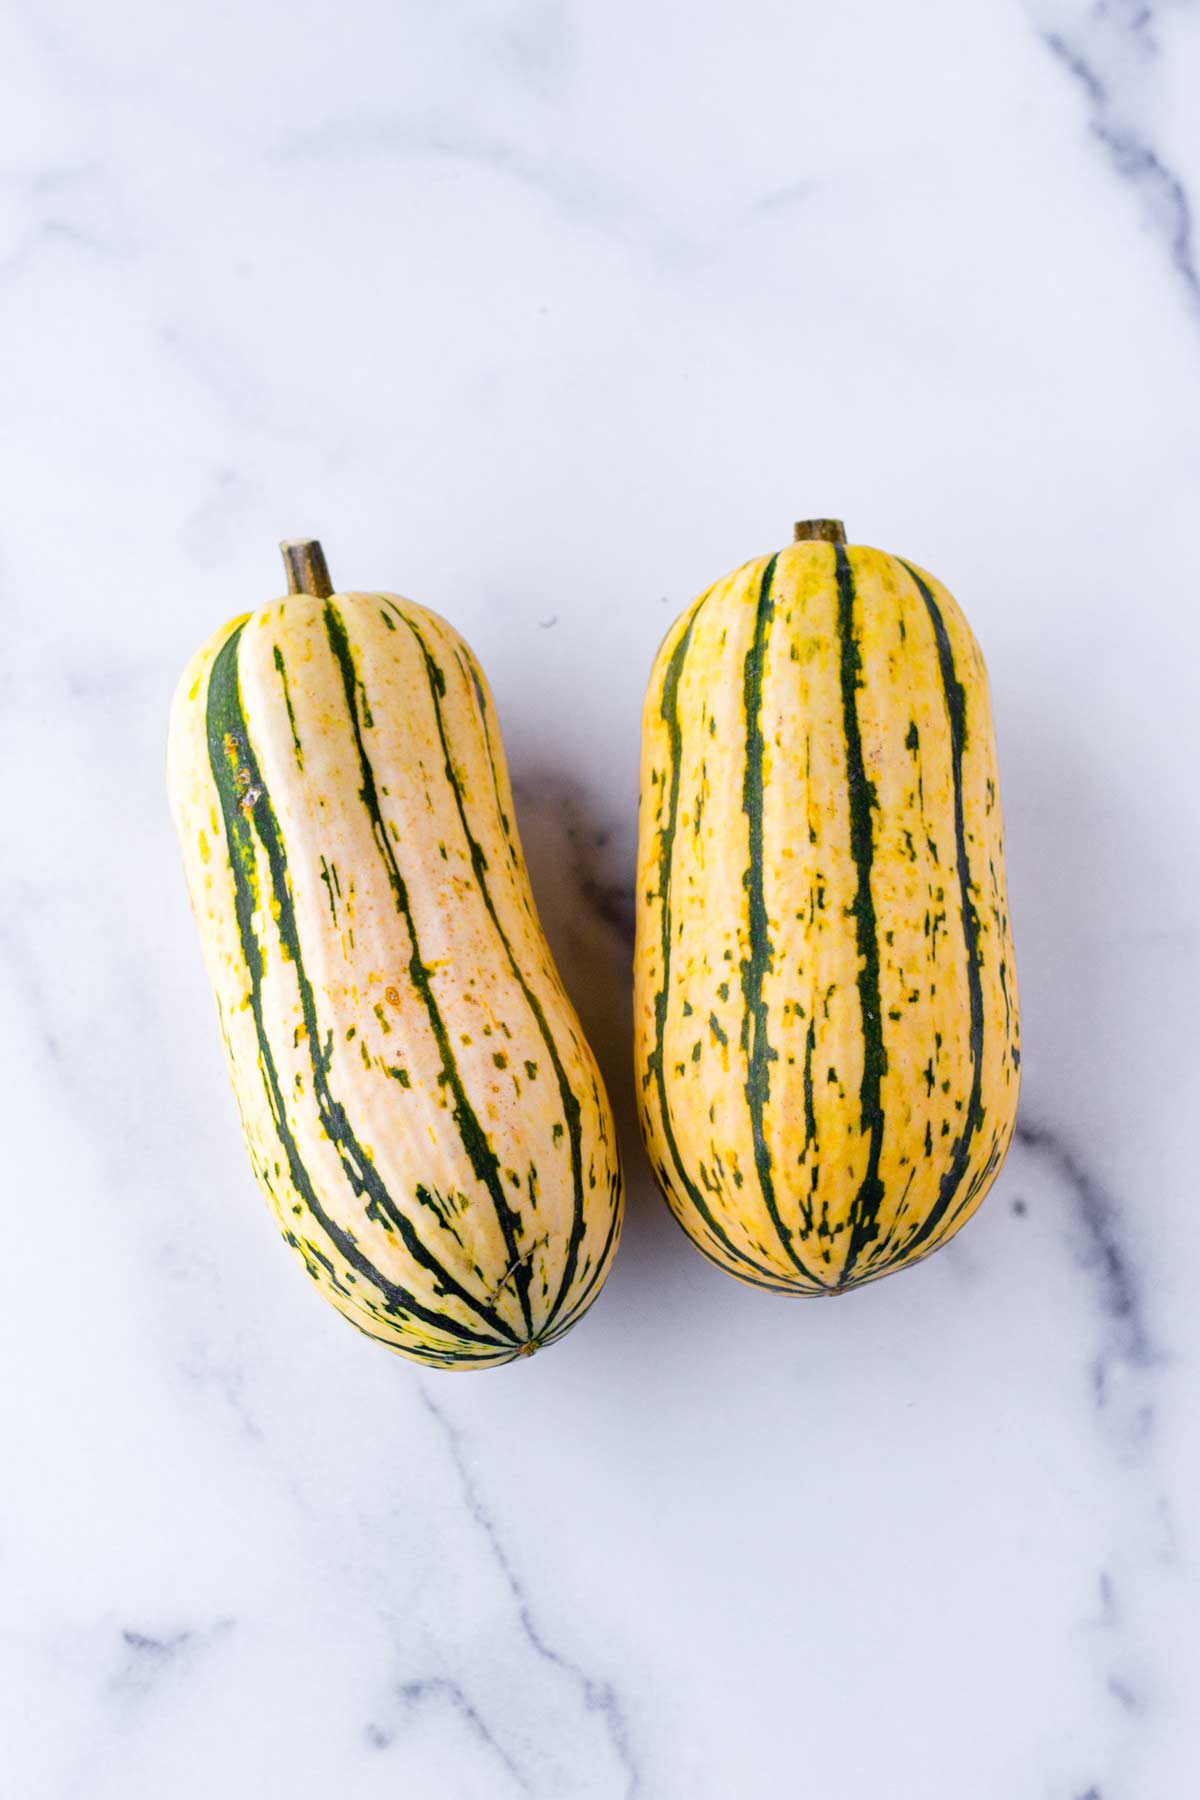 two whole unpeeled delicata squashes side by side